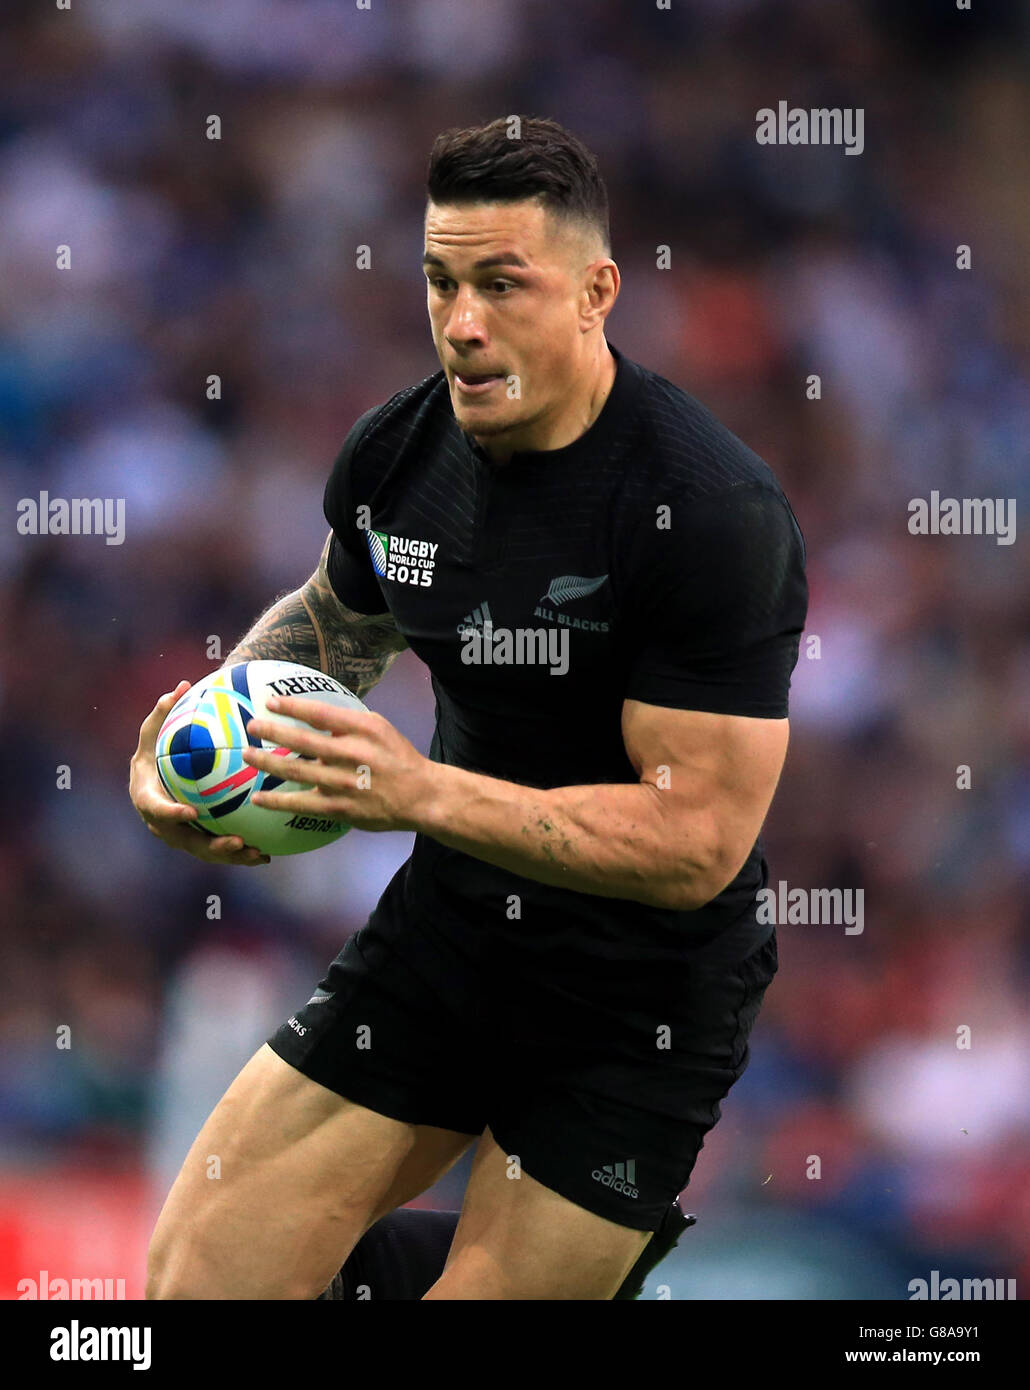 New Zealand's Sonny Bill Williams runs clear during the Rugby World Cup match at Wembley Stadium, London. PRESS ASSOCIATION Photo. Picture date: Sunday September 20, 2015. See PA story RUGBYU New Zealand. Photo credit should read: Mike Egerton/PA Wire. Stock Photo